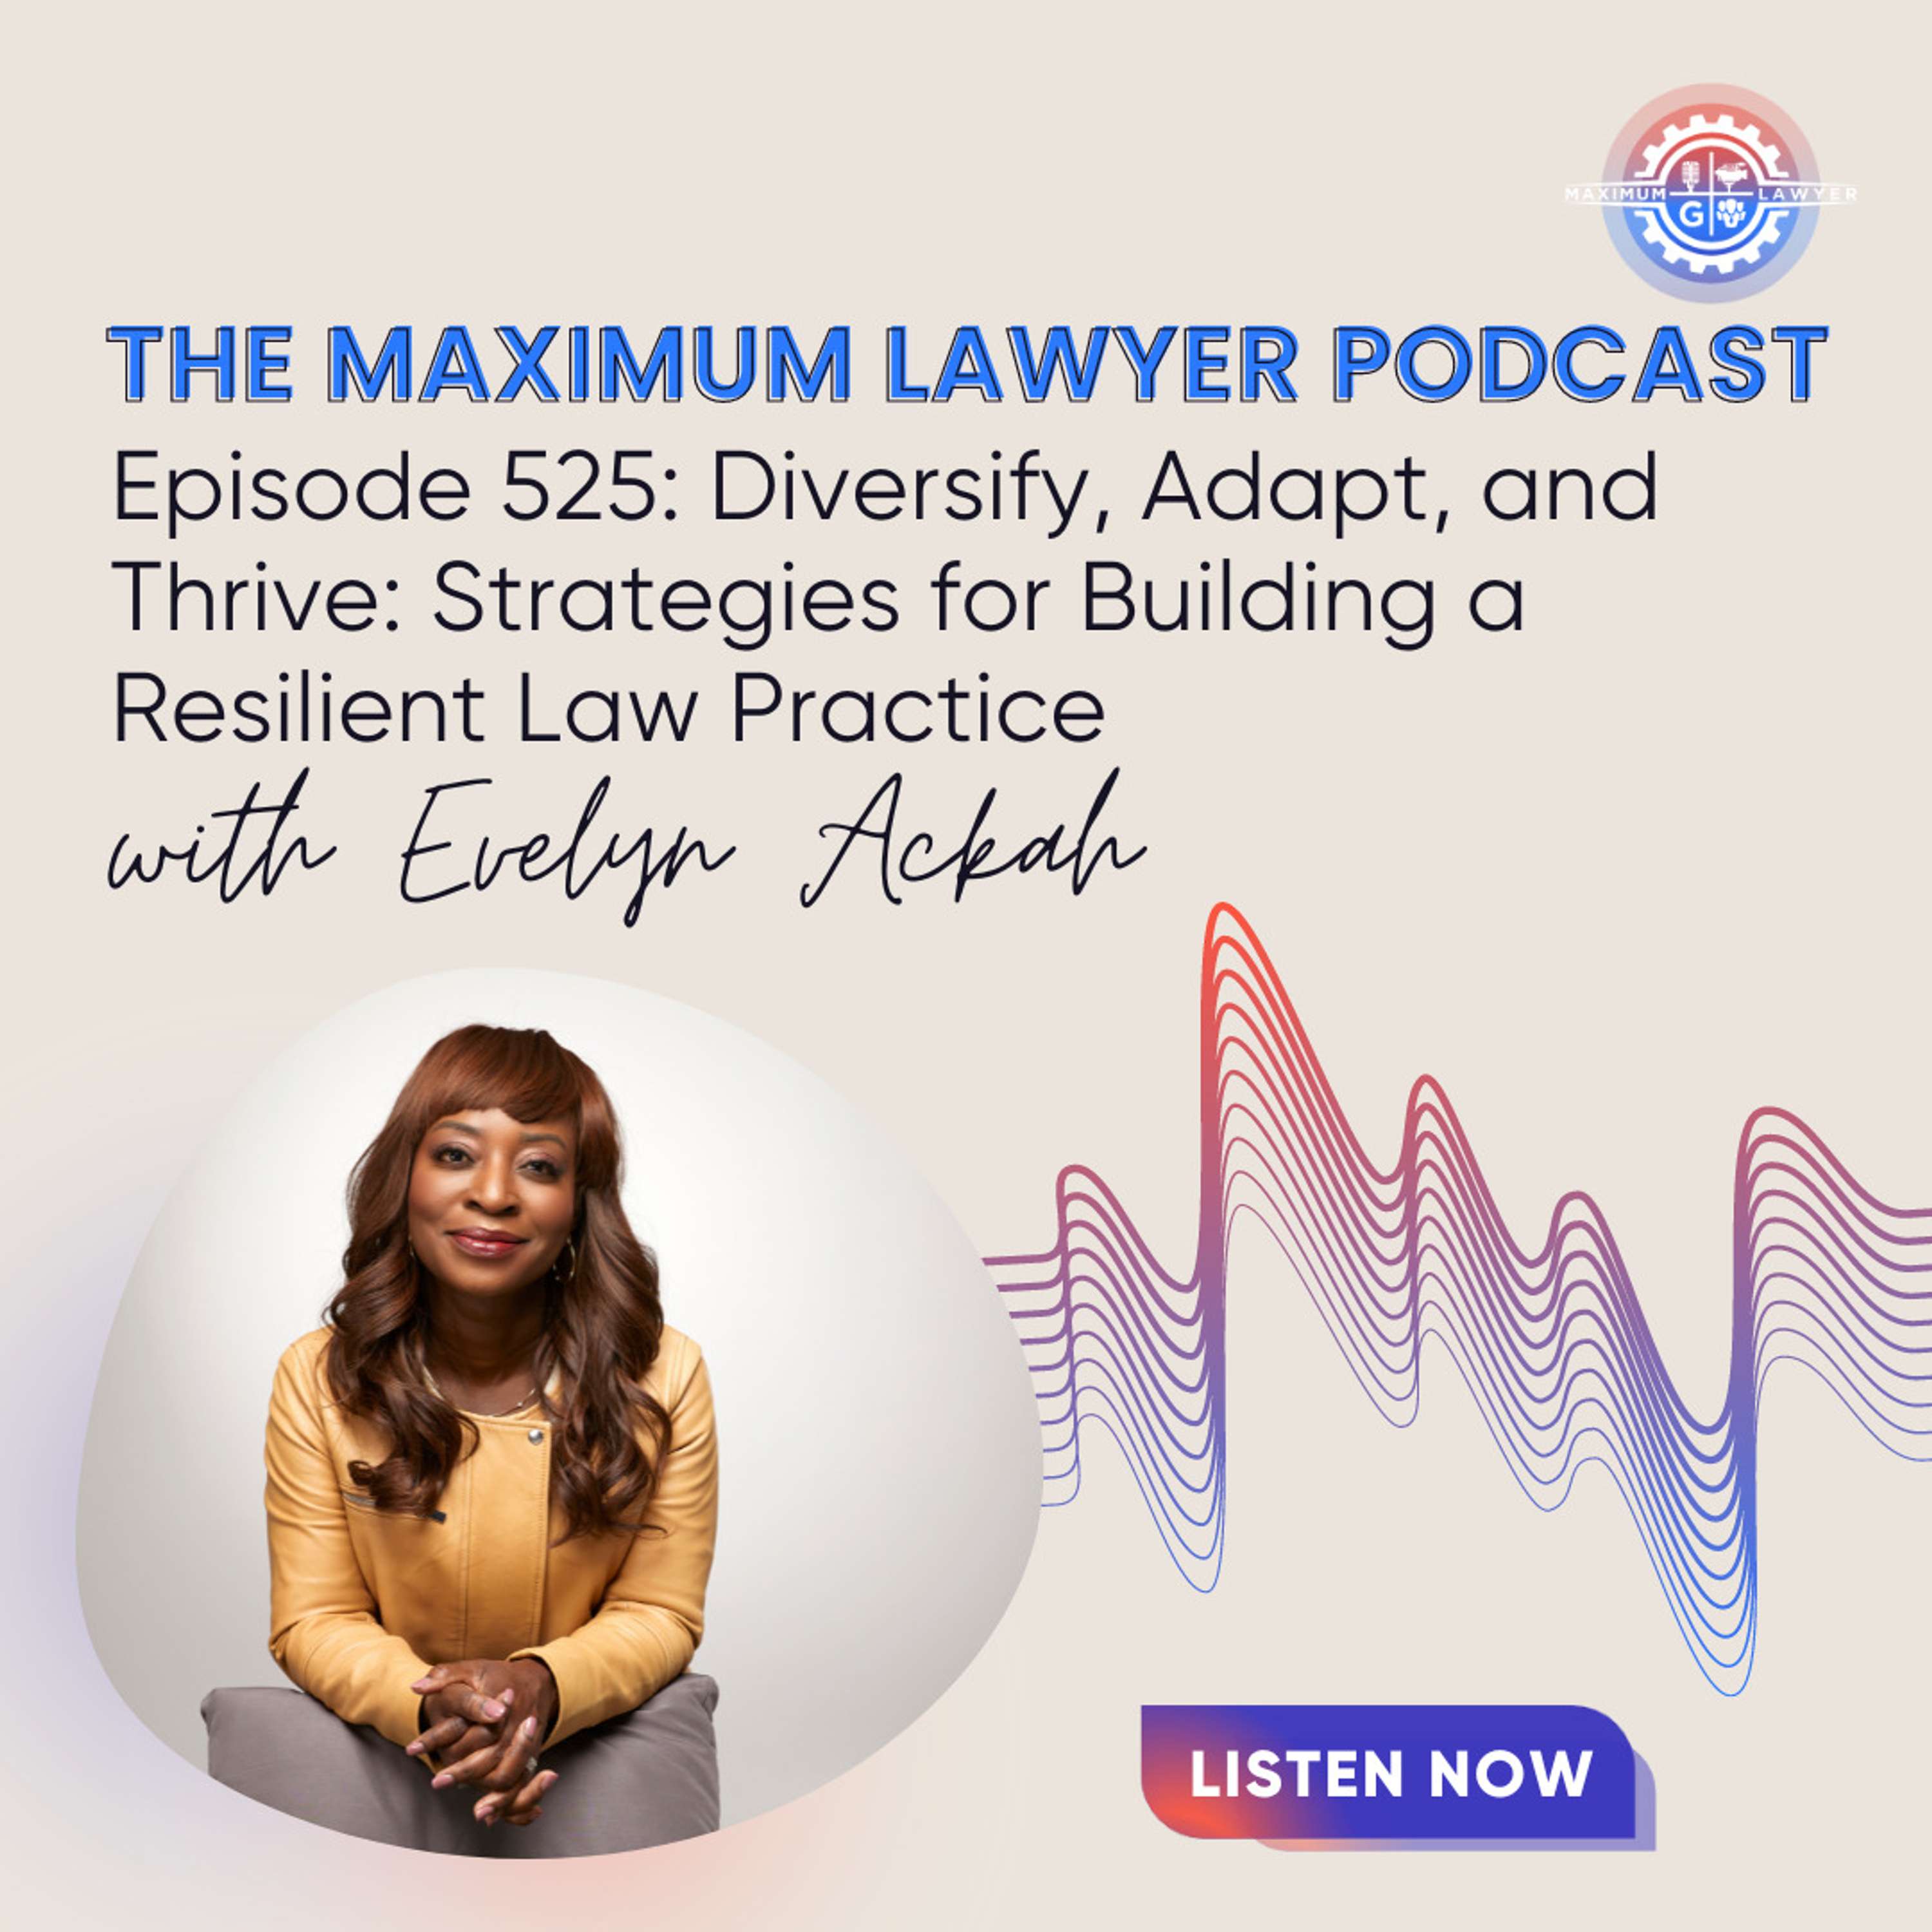 Diversify, Adapt, and Thrive: Strategies for Building a Resilient Law Practice with Evelyn Ackah